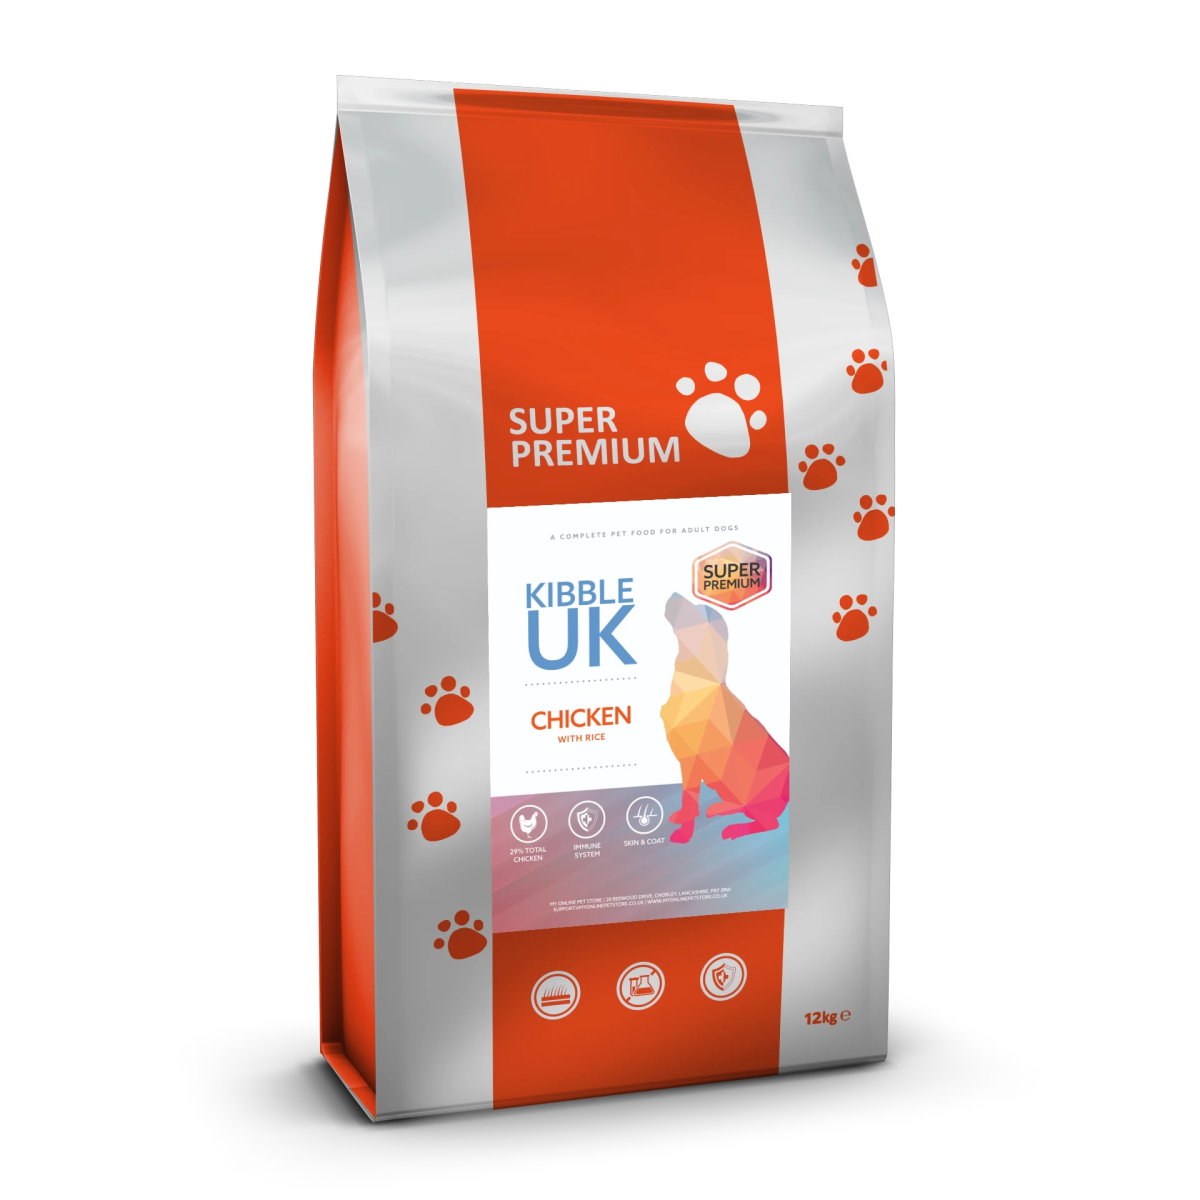 Super Premium Adult Dog Food - Chicken with Rice - Kibble UK - My Online Pet Store